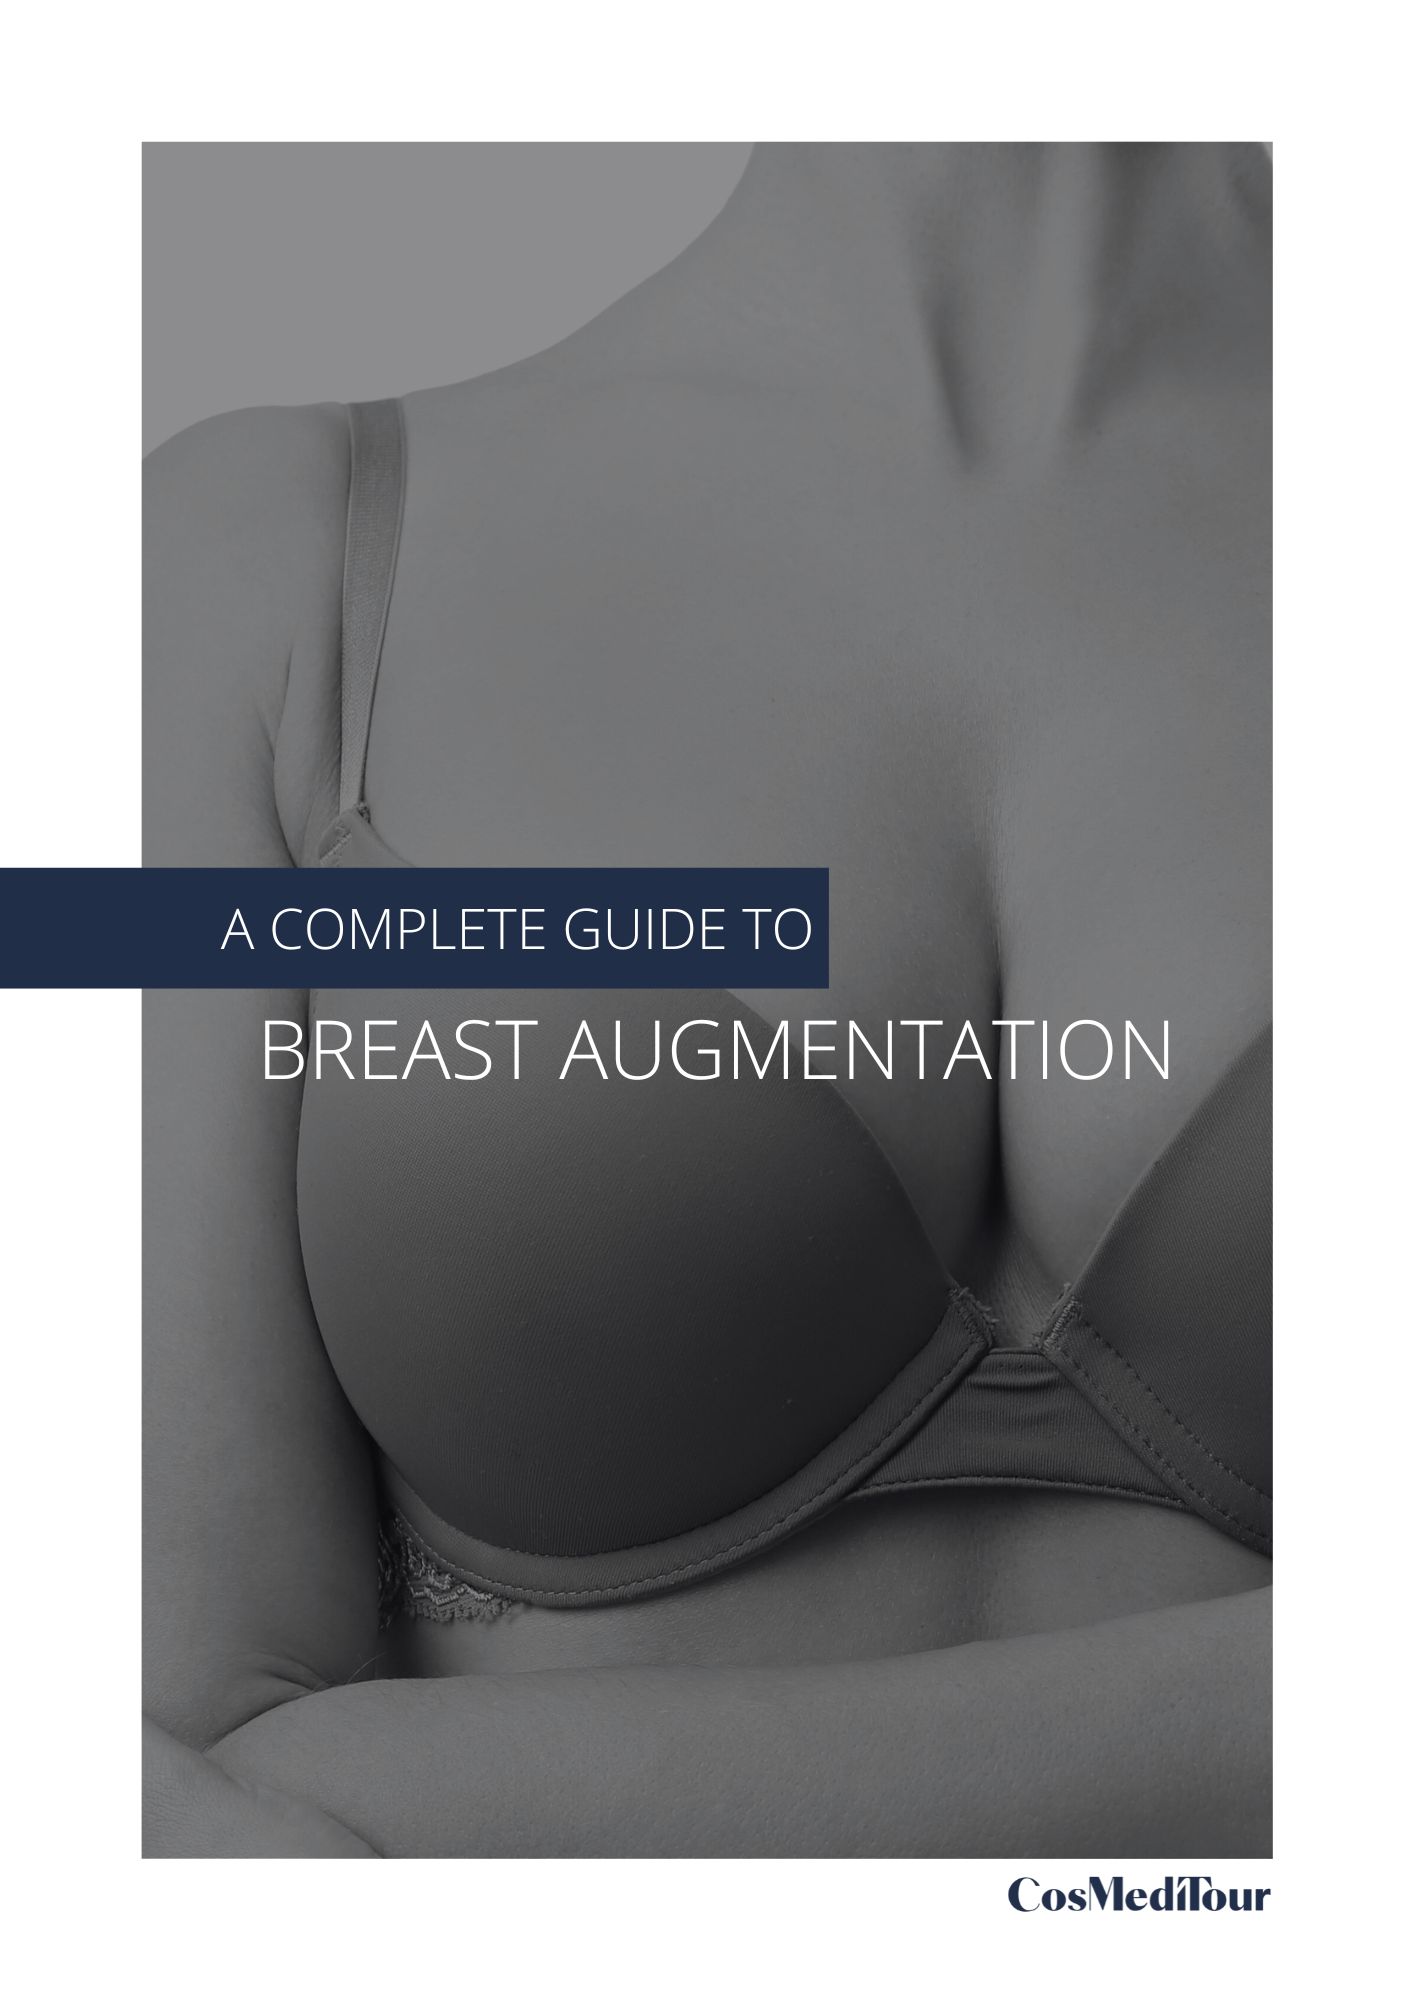 The Good Boob Bible: Your Complete Guide to Breast Augmentation Surgery